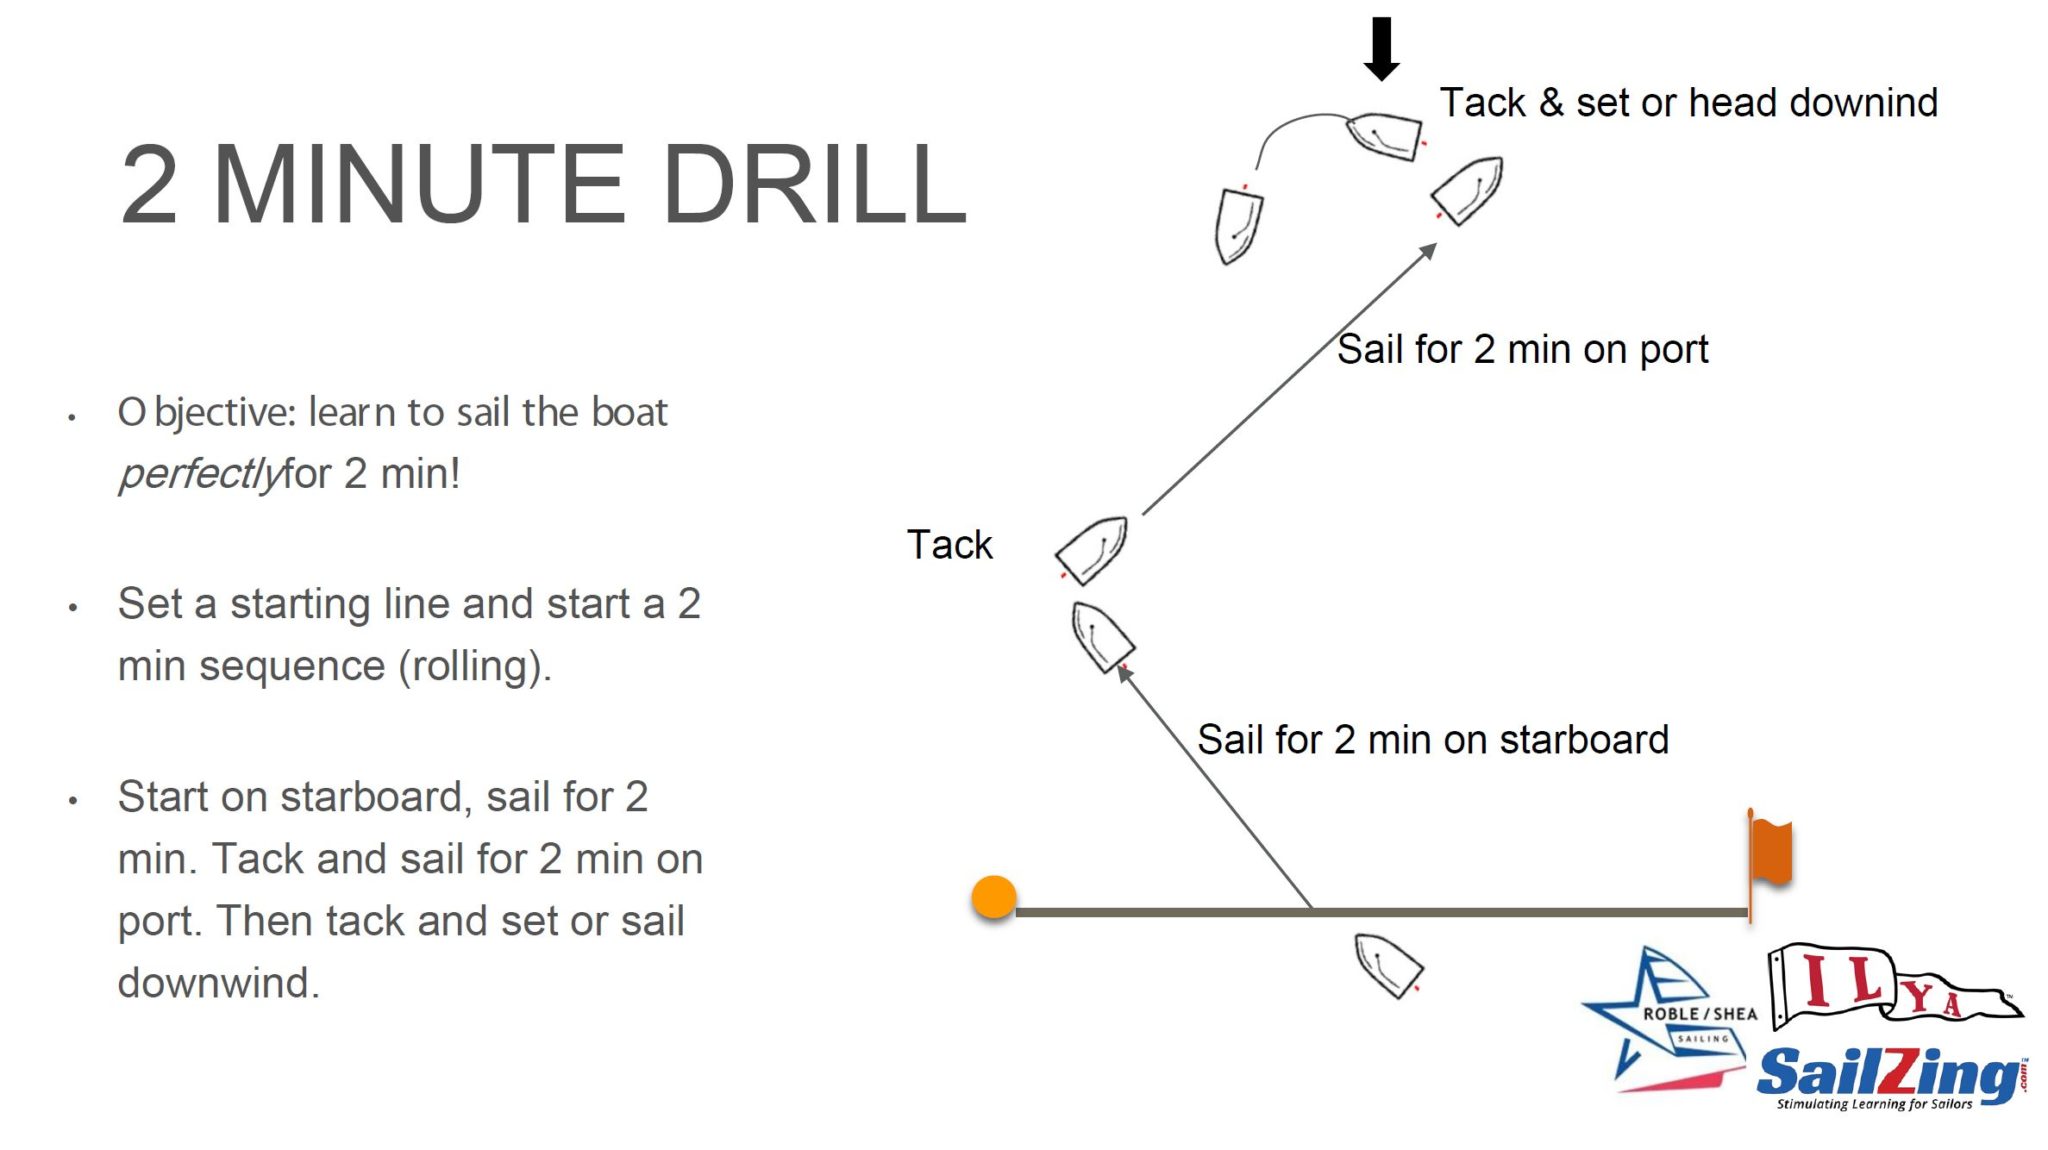 lane management after the start - 2 minute drill